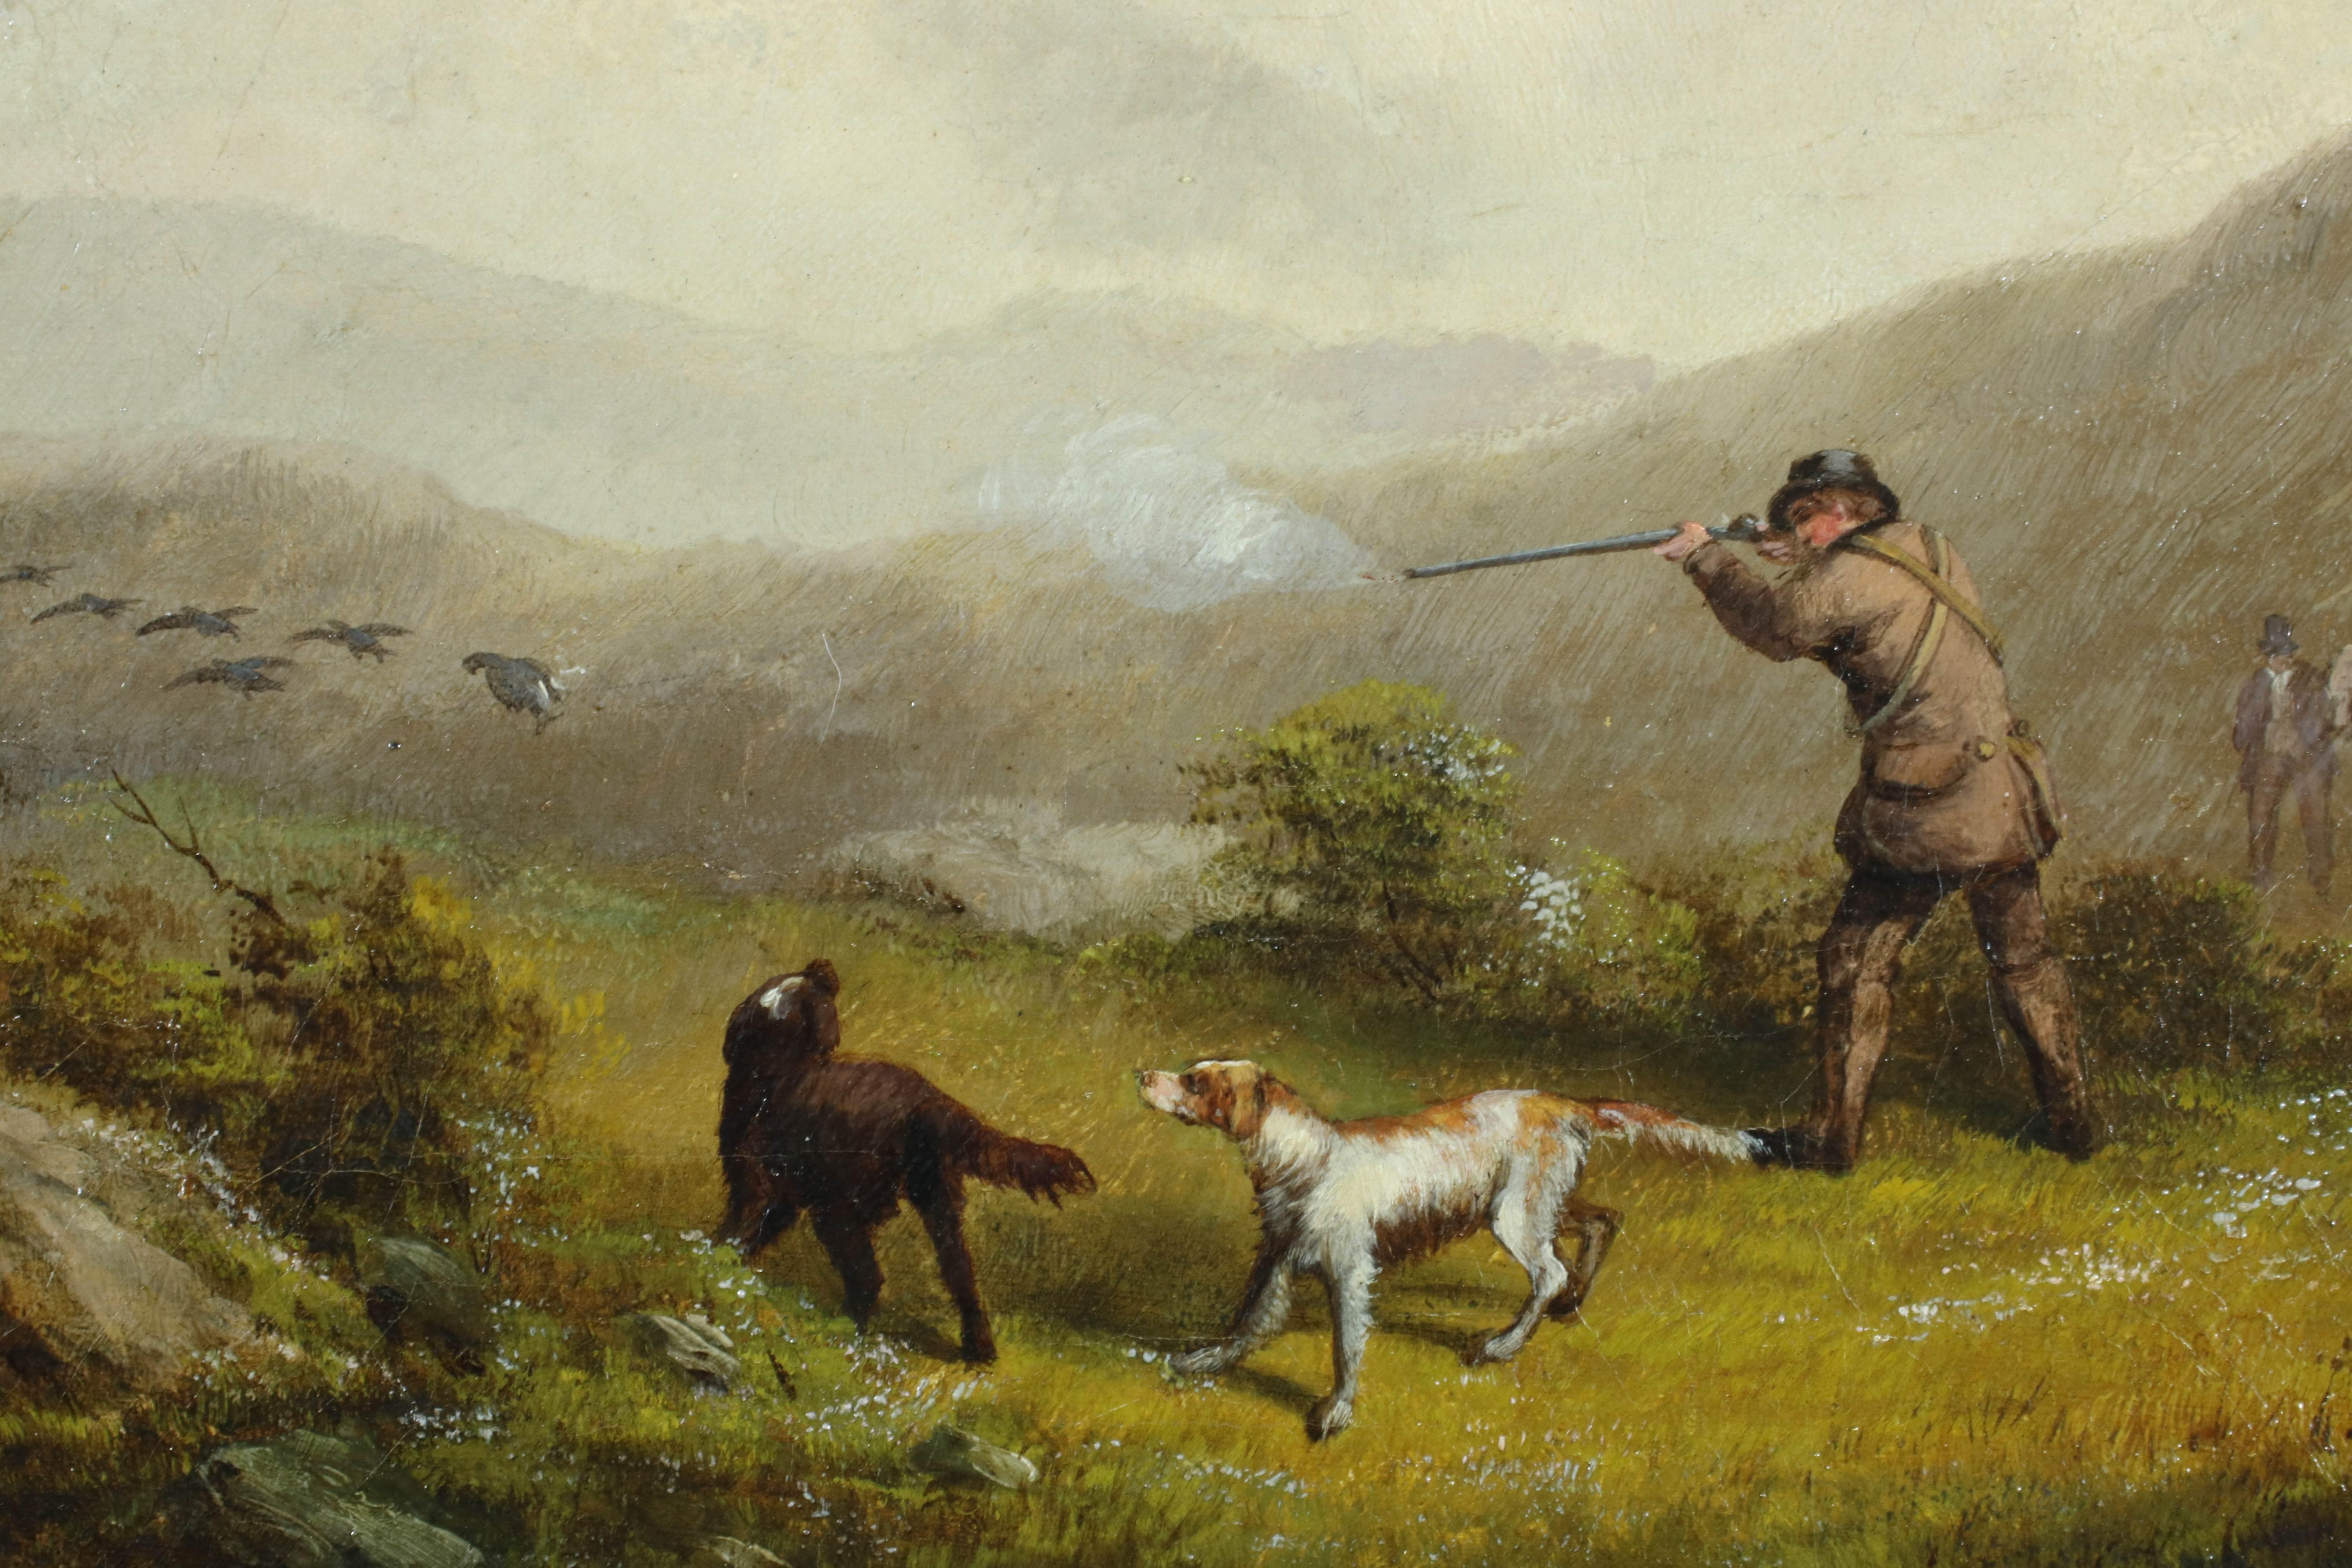 The Grouse Shoot, 19th century Gun shooting Grouse with Gun dogs and hilly landscape
Oil on Canvas on original stretchers, housed in its original bronzed frame.

This is a very special oil painting and quite a rare one too.  It is not often you can